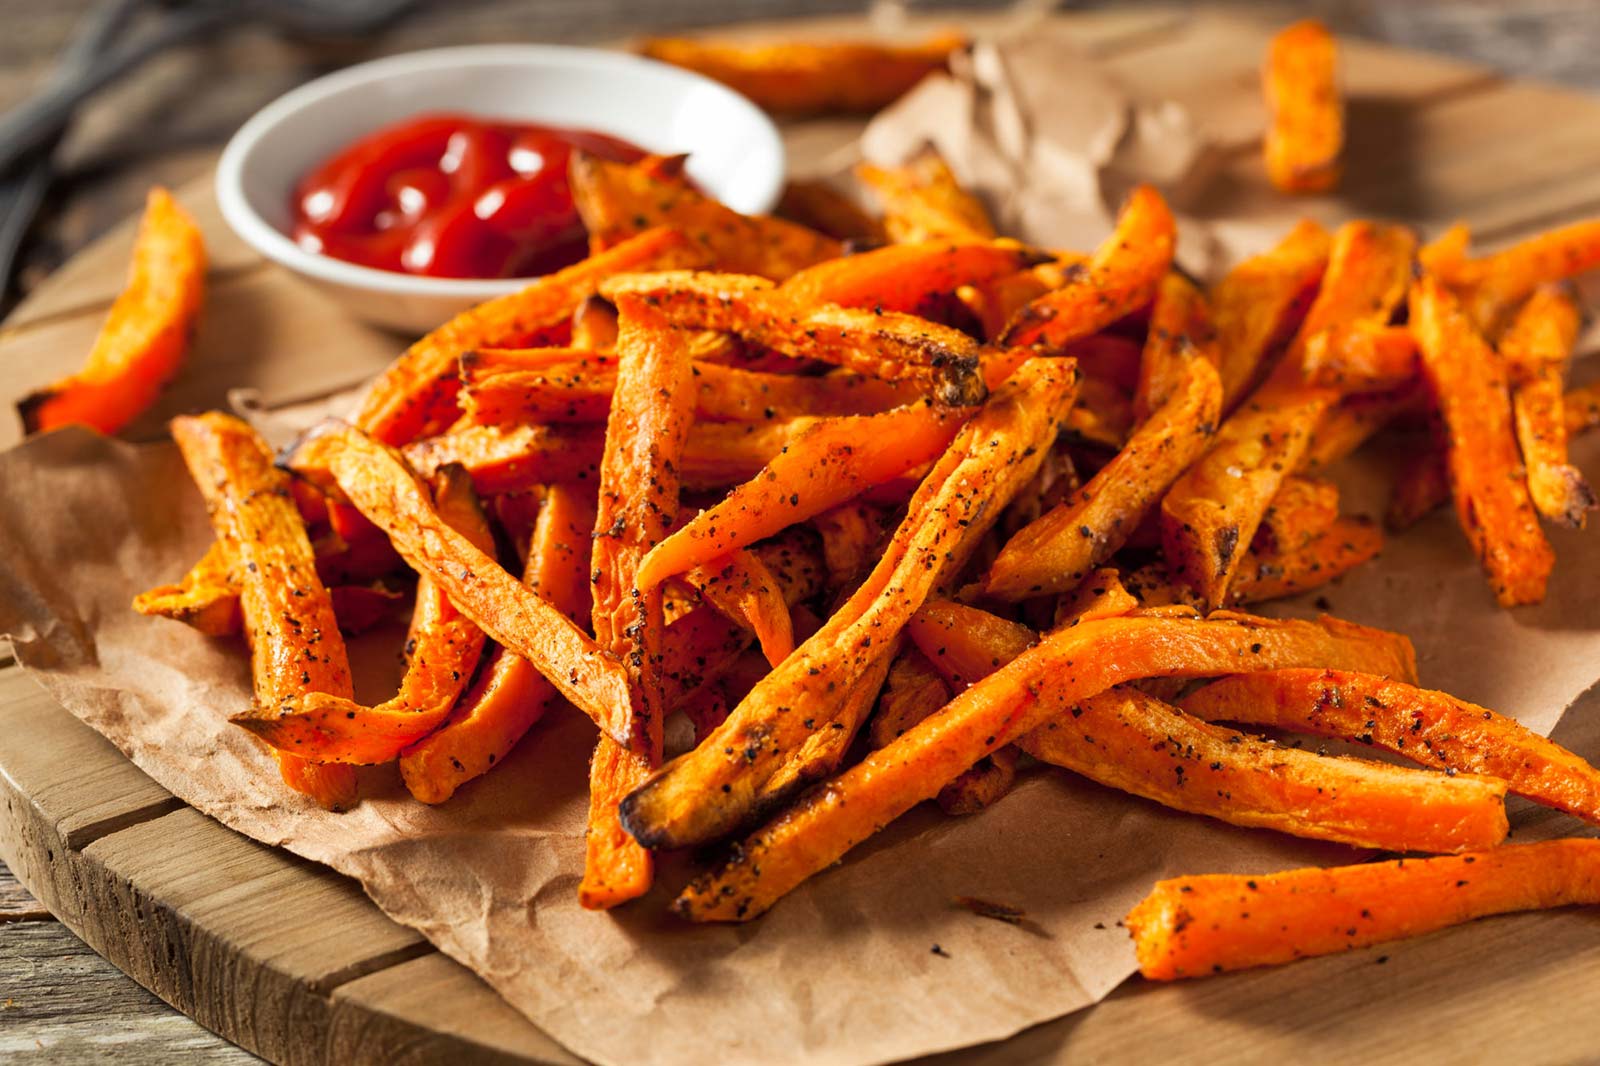 🍅 If You Eat 17/33 of These Foods With Ketchup, Then You’re a Monster Sweet potato fries